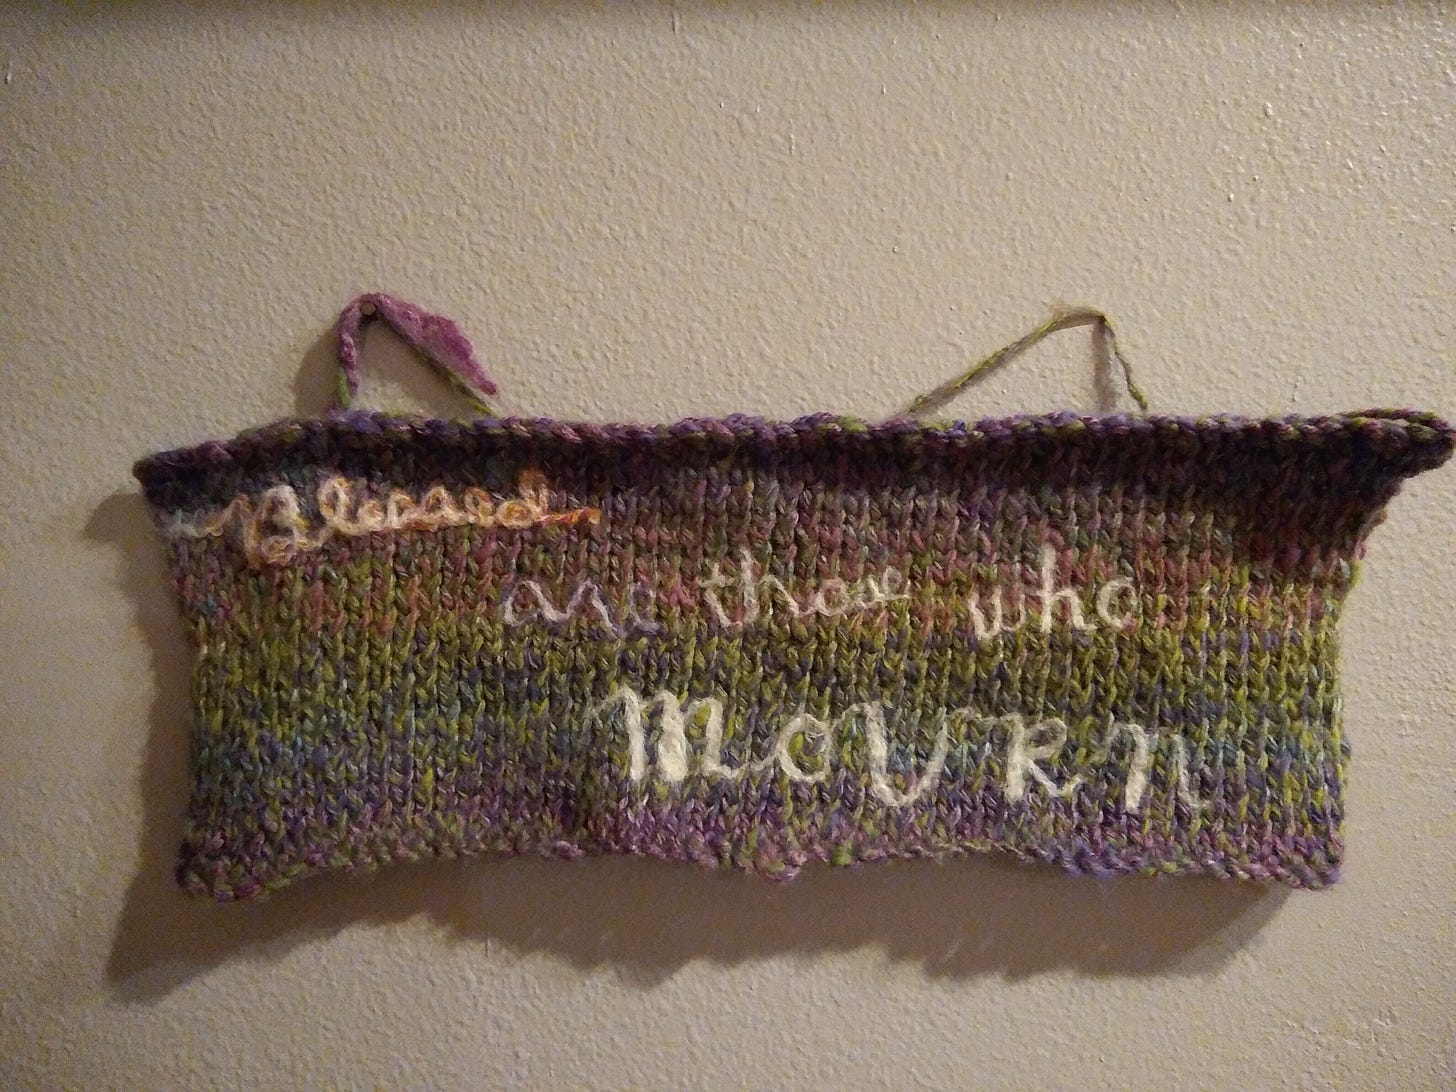 A longer piece of knitting hanging on a wall, with the words "Blessed are those who MOURN" felted onto it